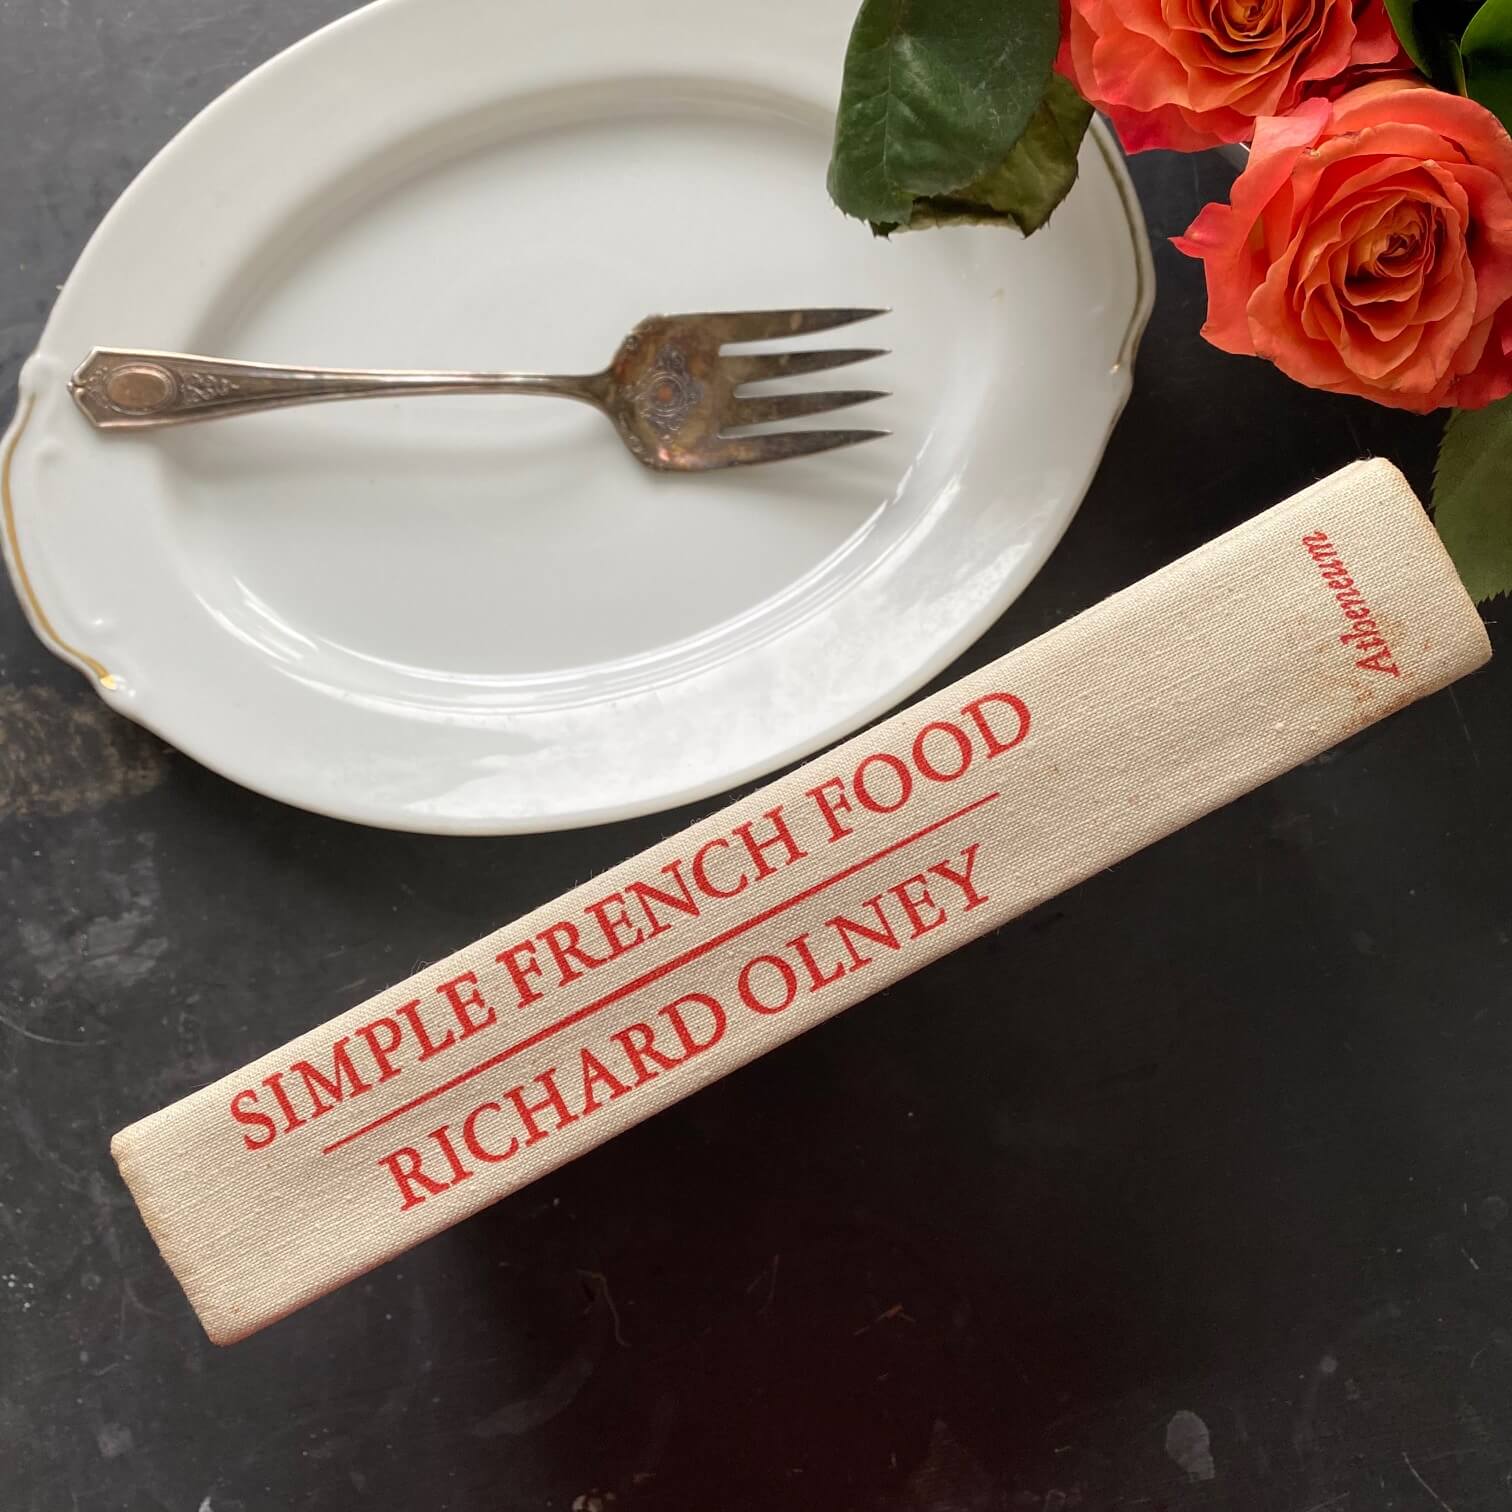 Simple French Food - Richard Olney - 1974 Edition, Second Printing